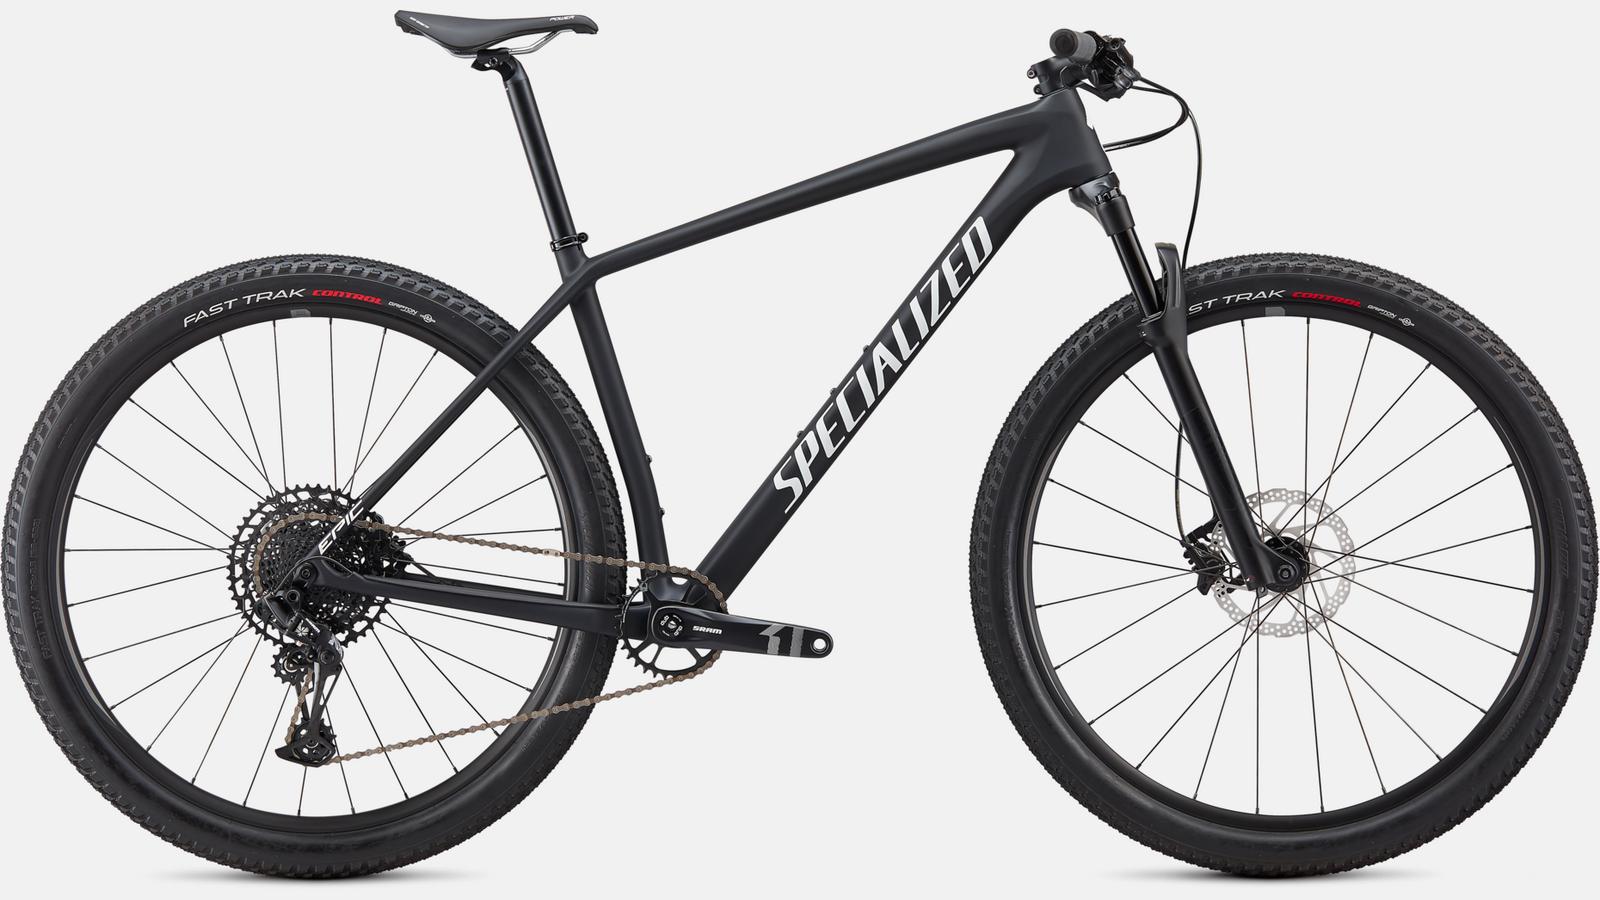 Paint for 2020 Specialized Epic Hardtail - Satin Black